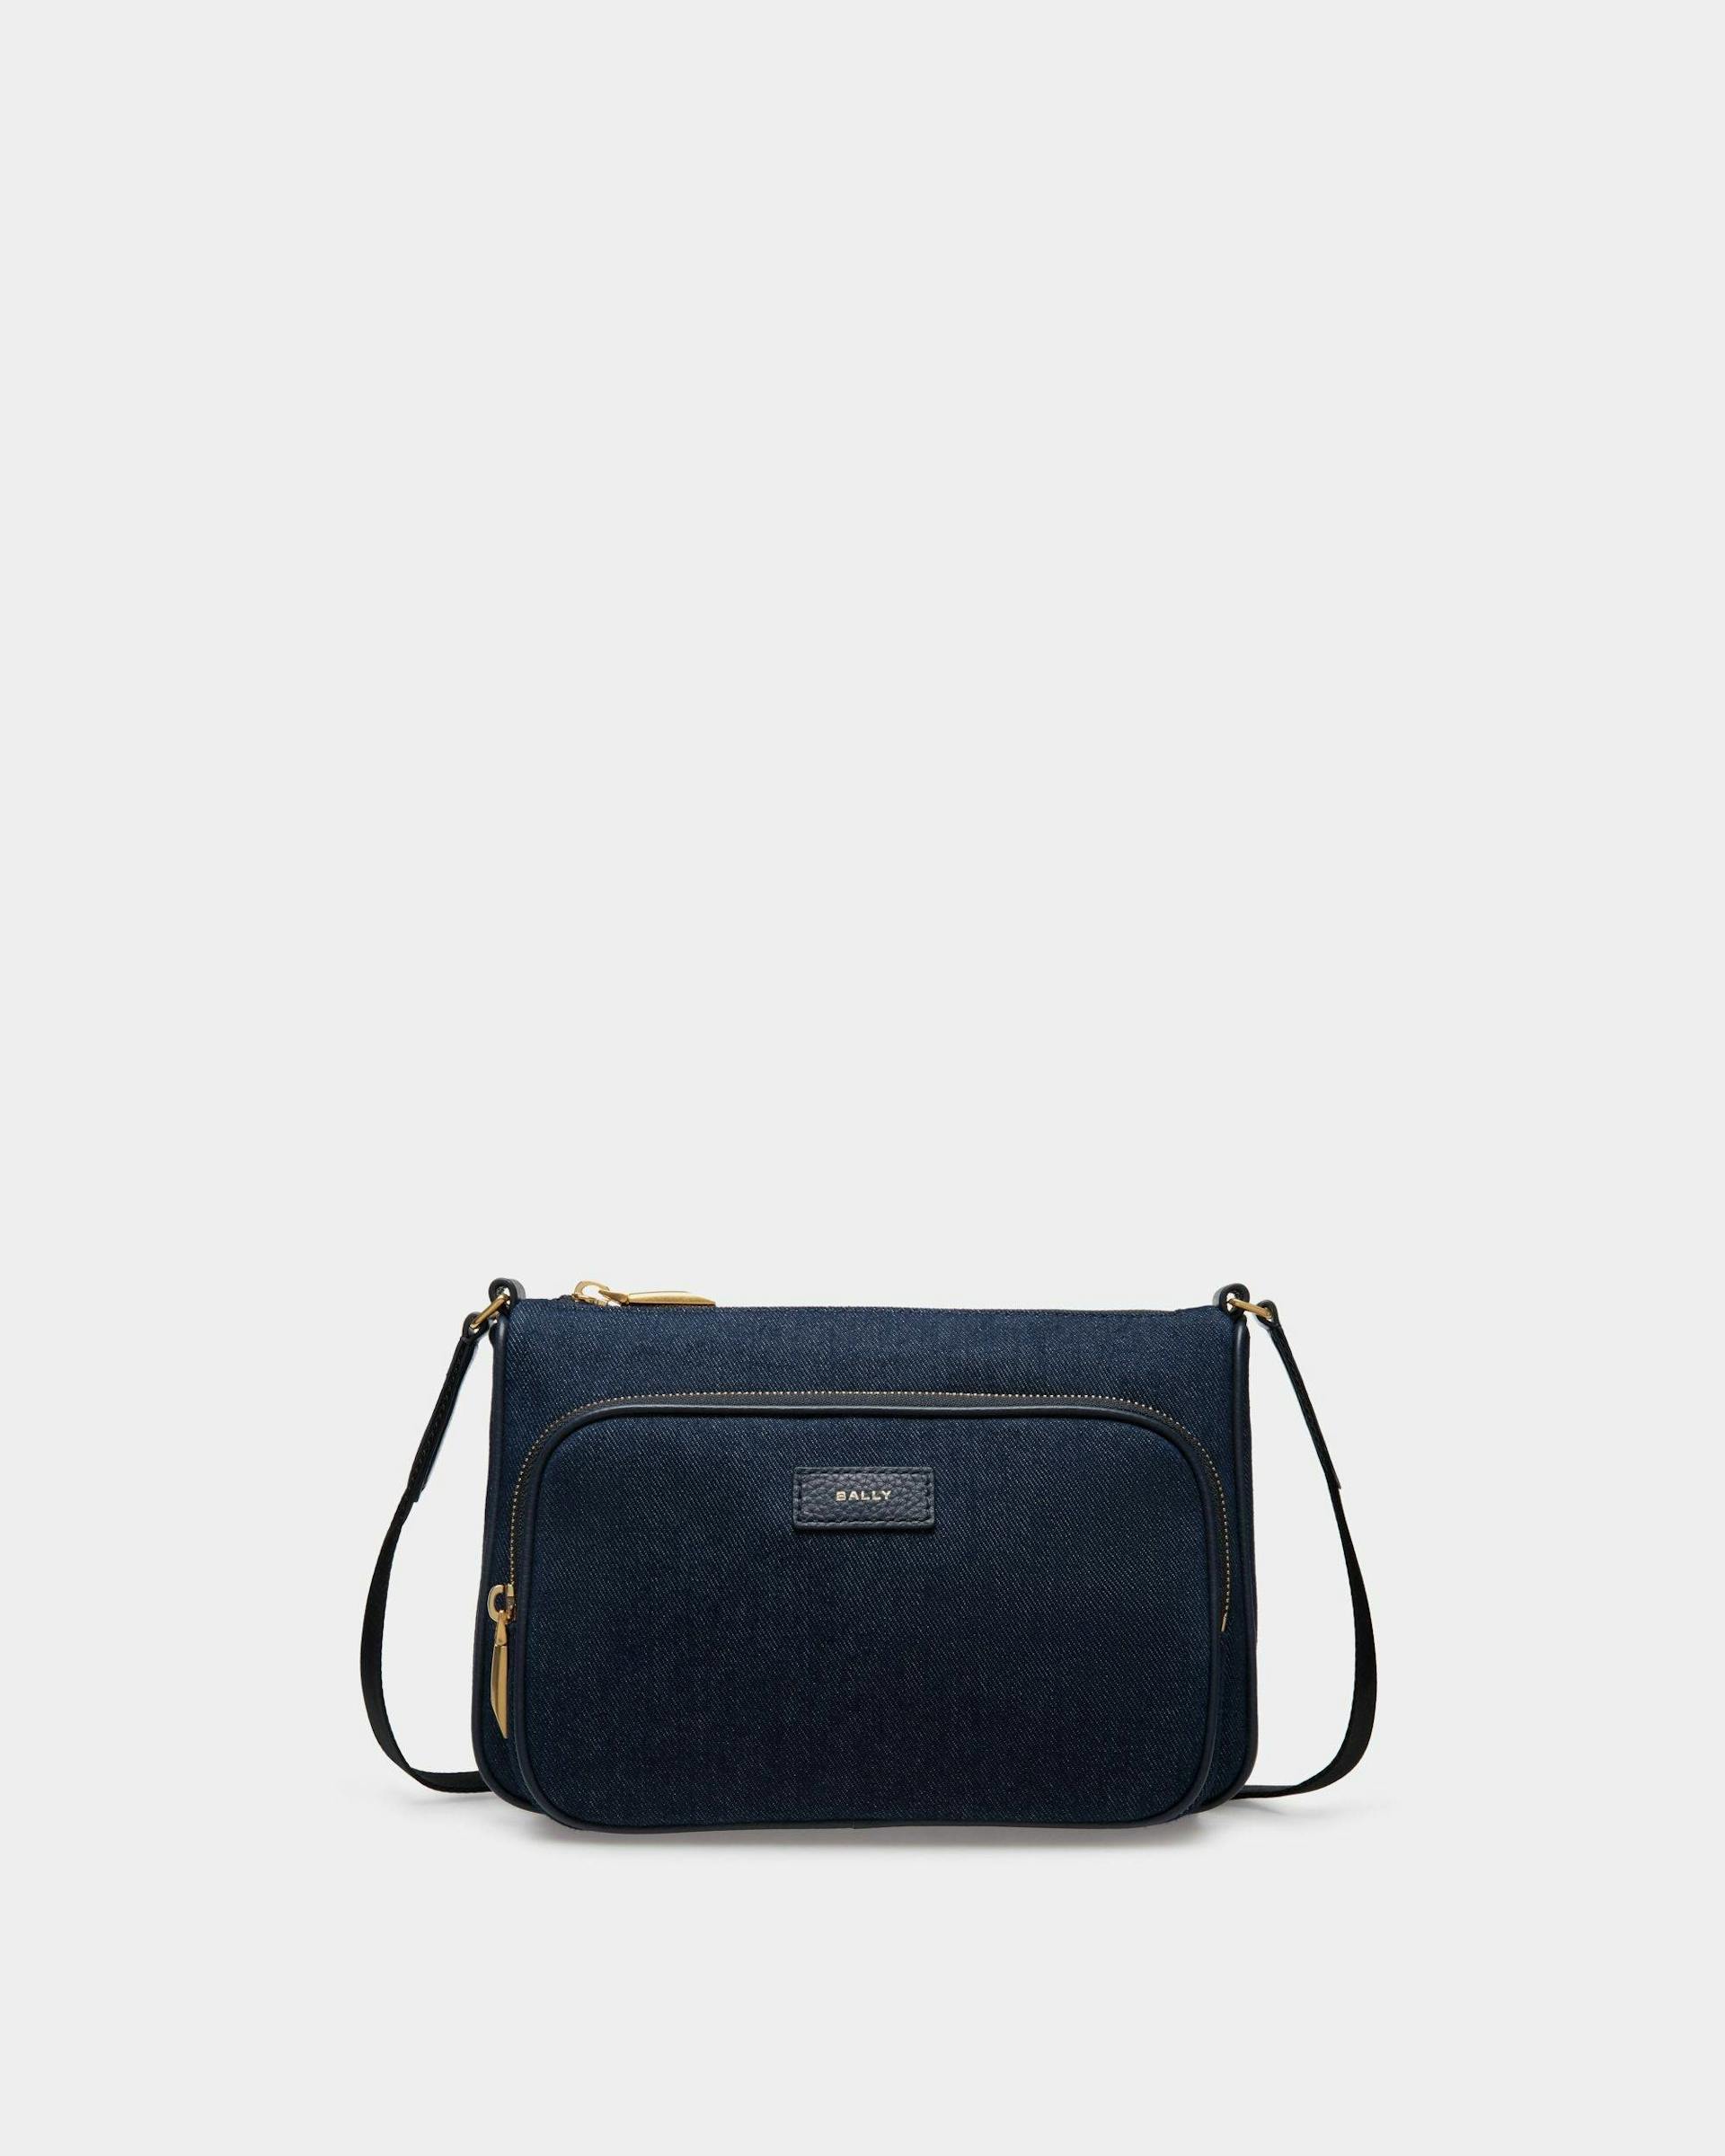 Men's Bar Crossbody Bag in Canvas And Leather | Bally | Still Life Front